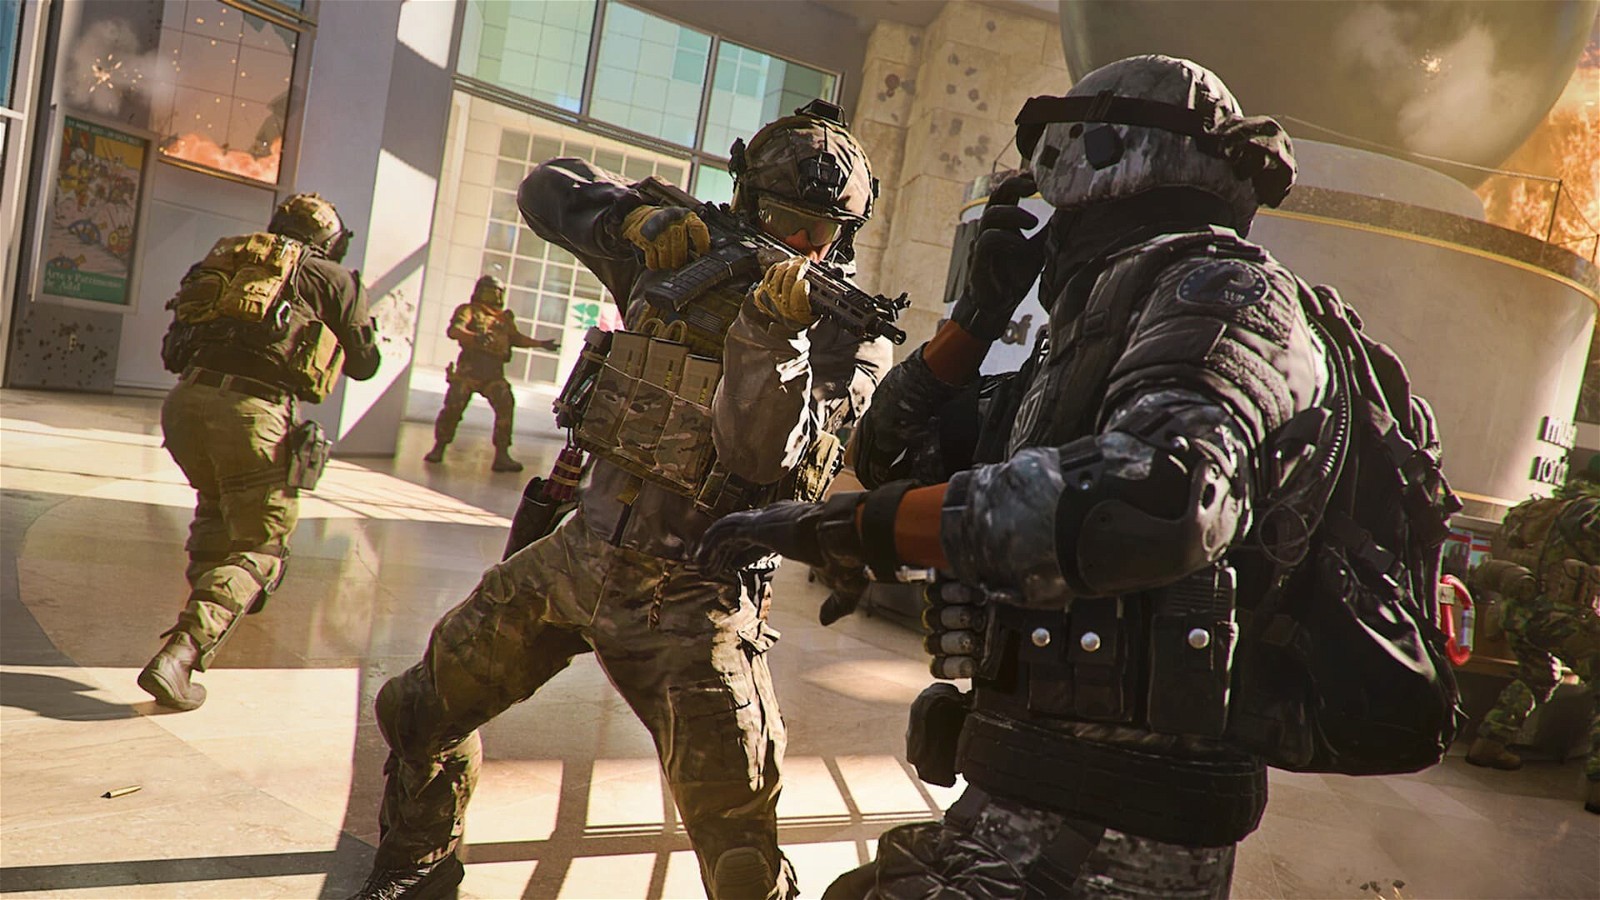 Over 3,000 developers are currently working on Call of Duty games